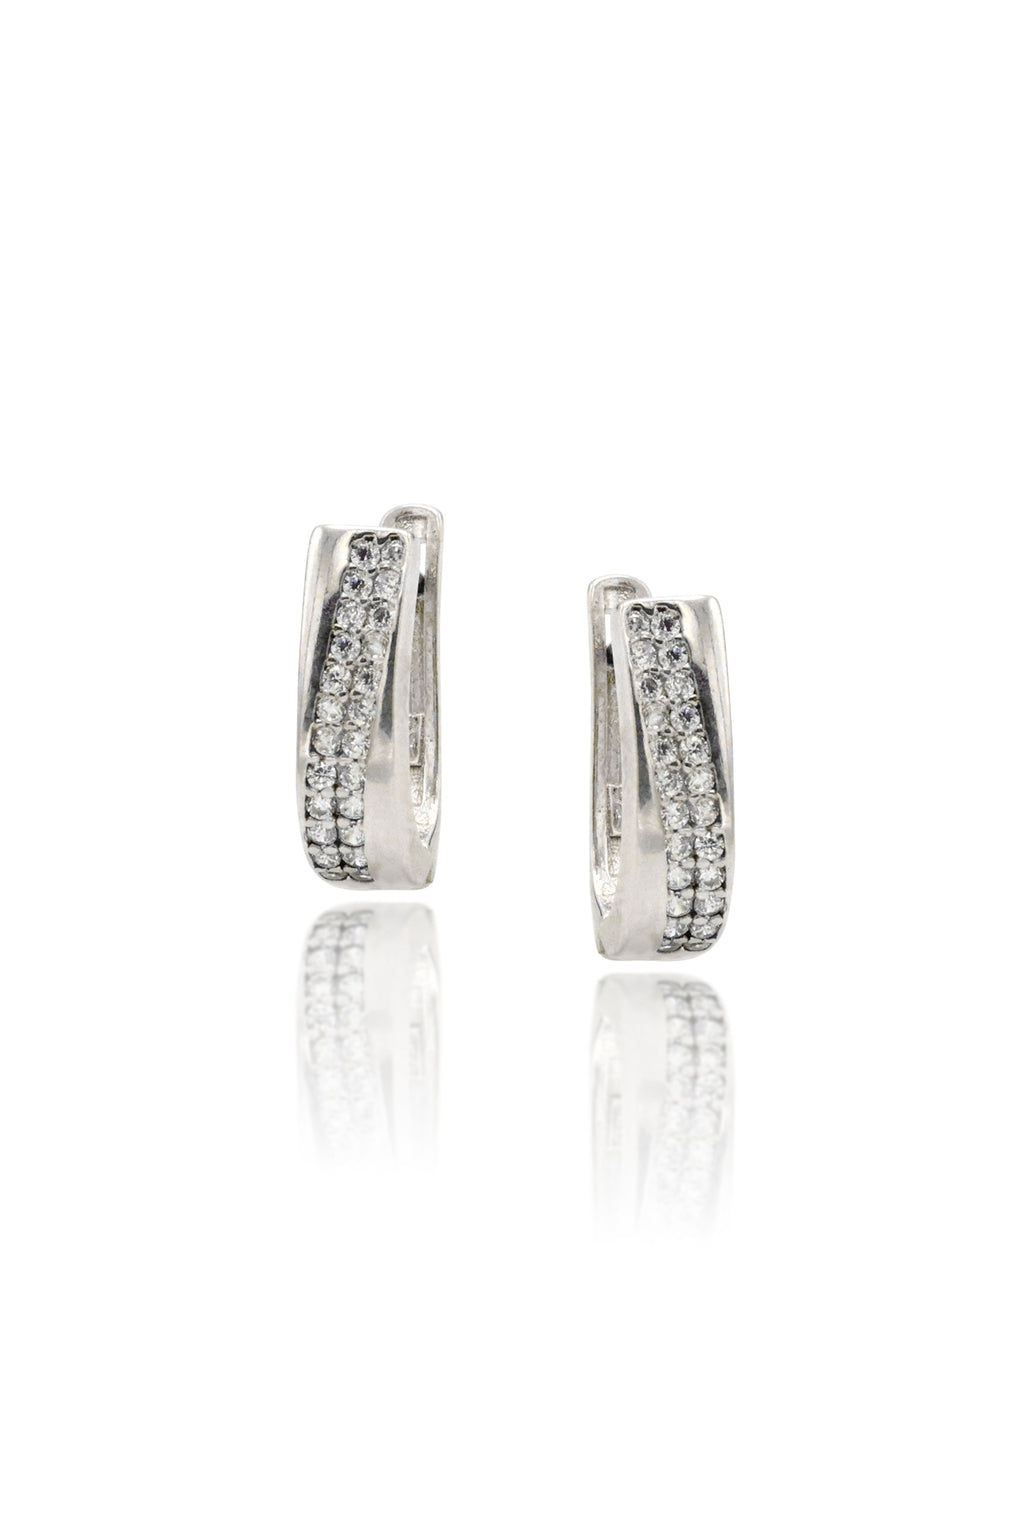 Rectangle Model Silver Earrings With Zircon (NG201019479)